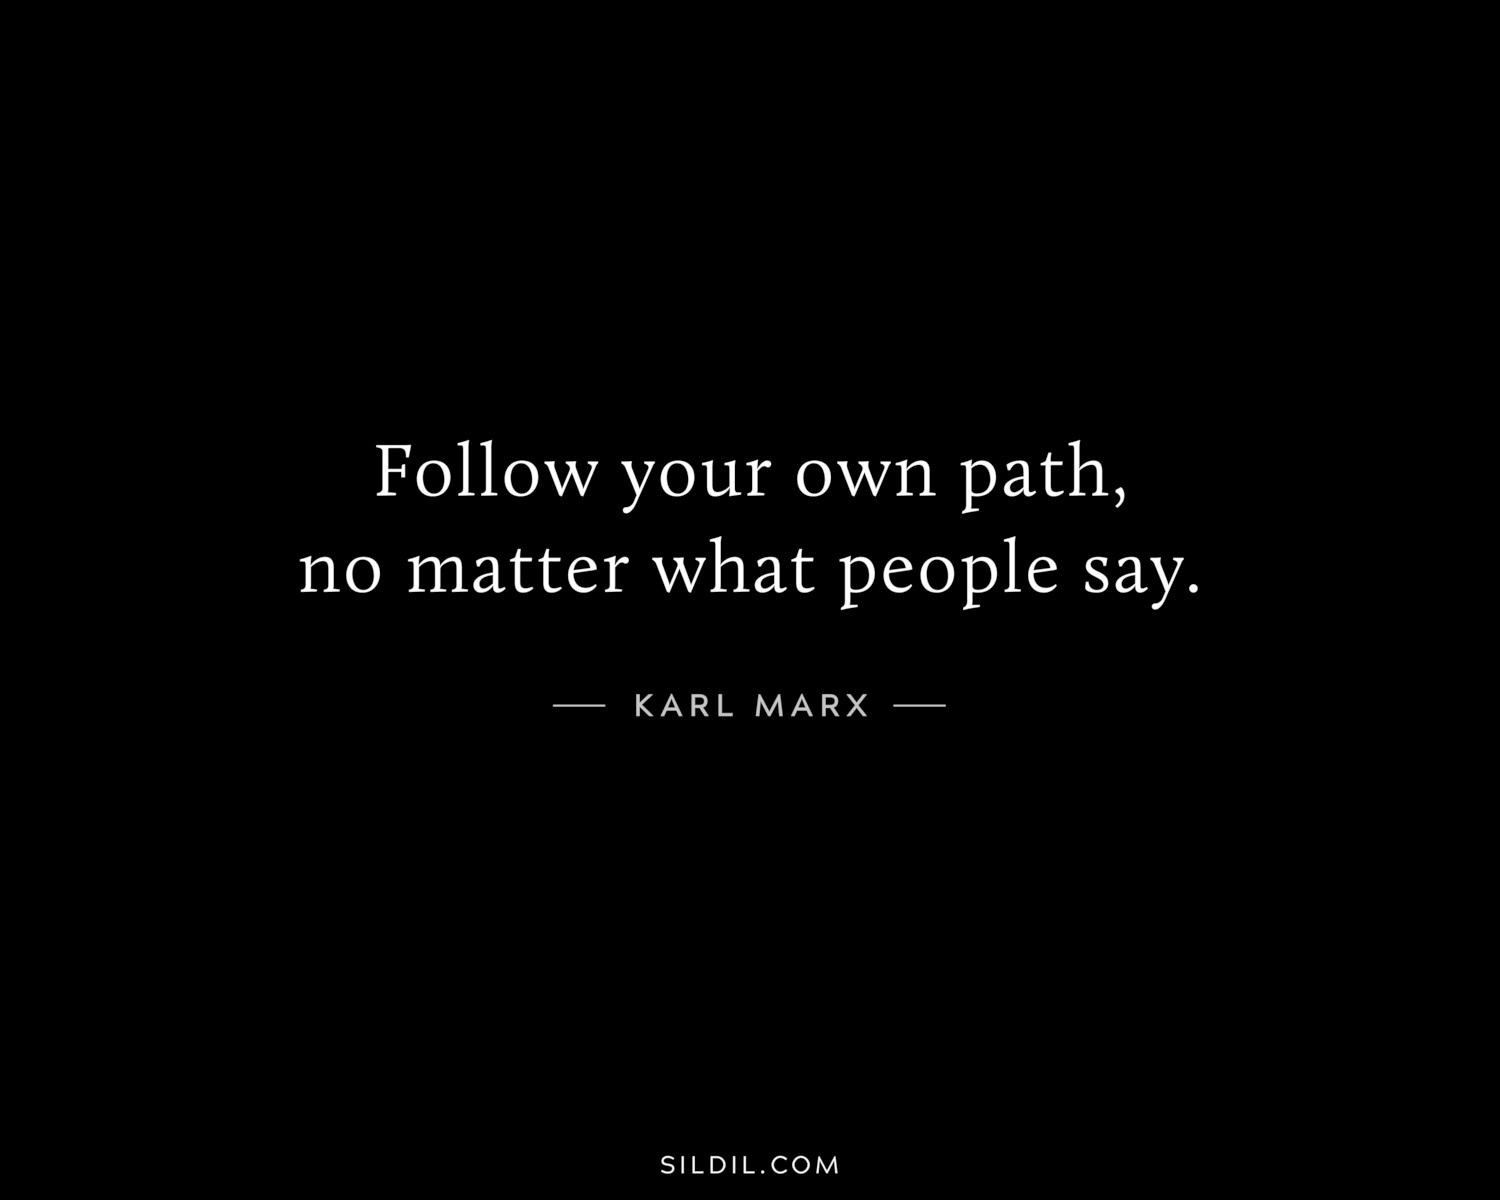 Follow your own path, no matter what people say.